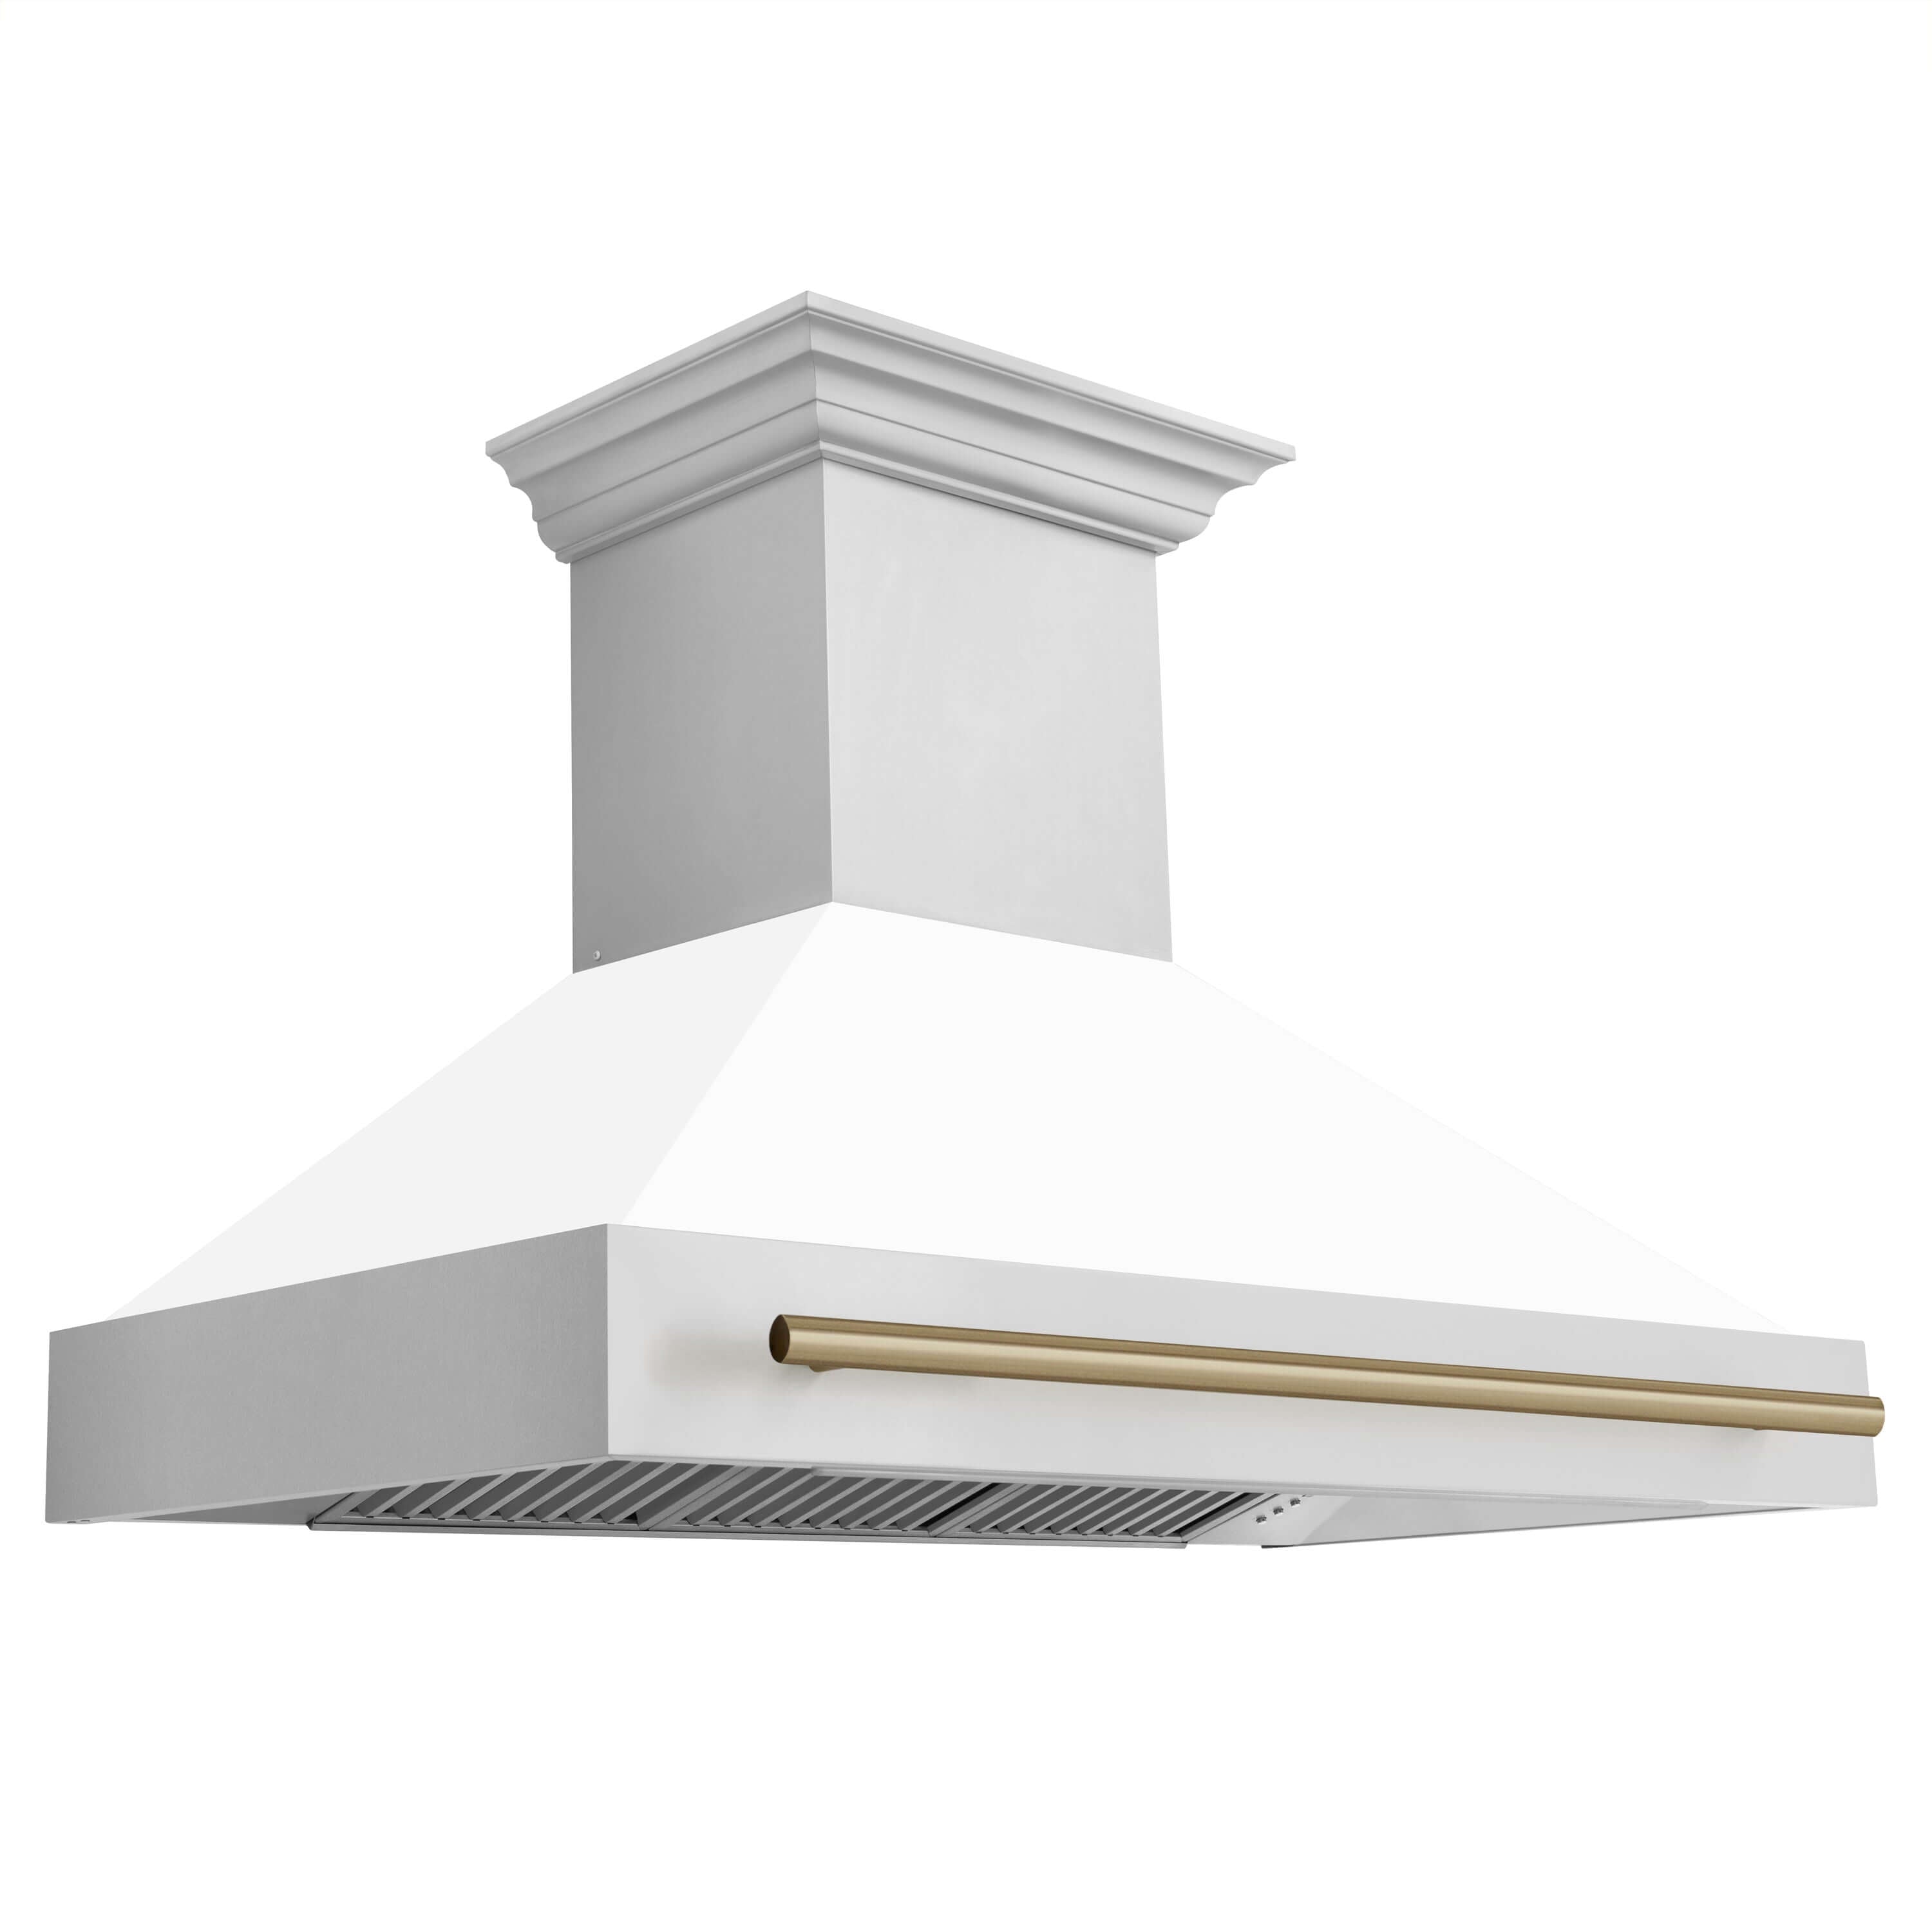 48" ZLINE Autograph Edition Stainless Steel Range Hood with White Matte Shell and Matte Black Handle (8654STZ-WM48-MB)